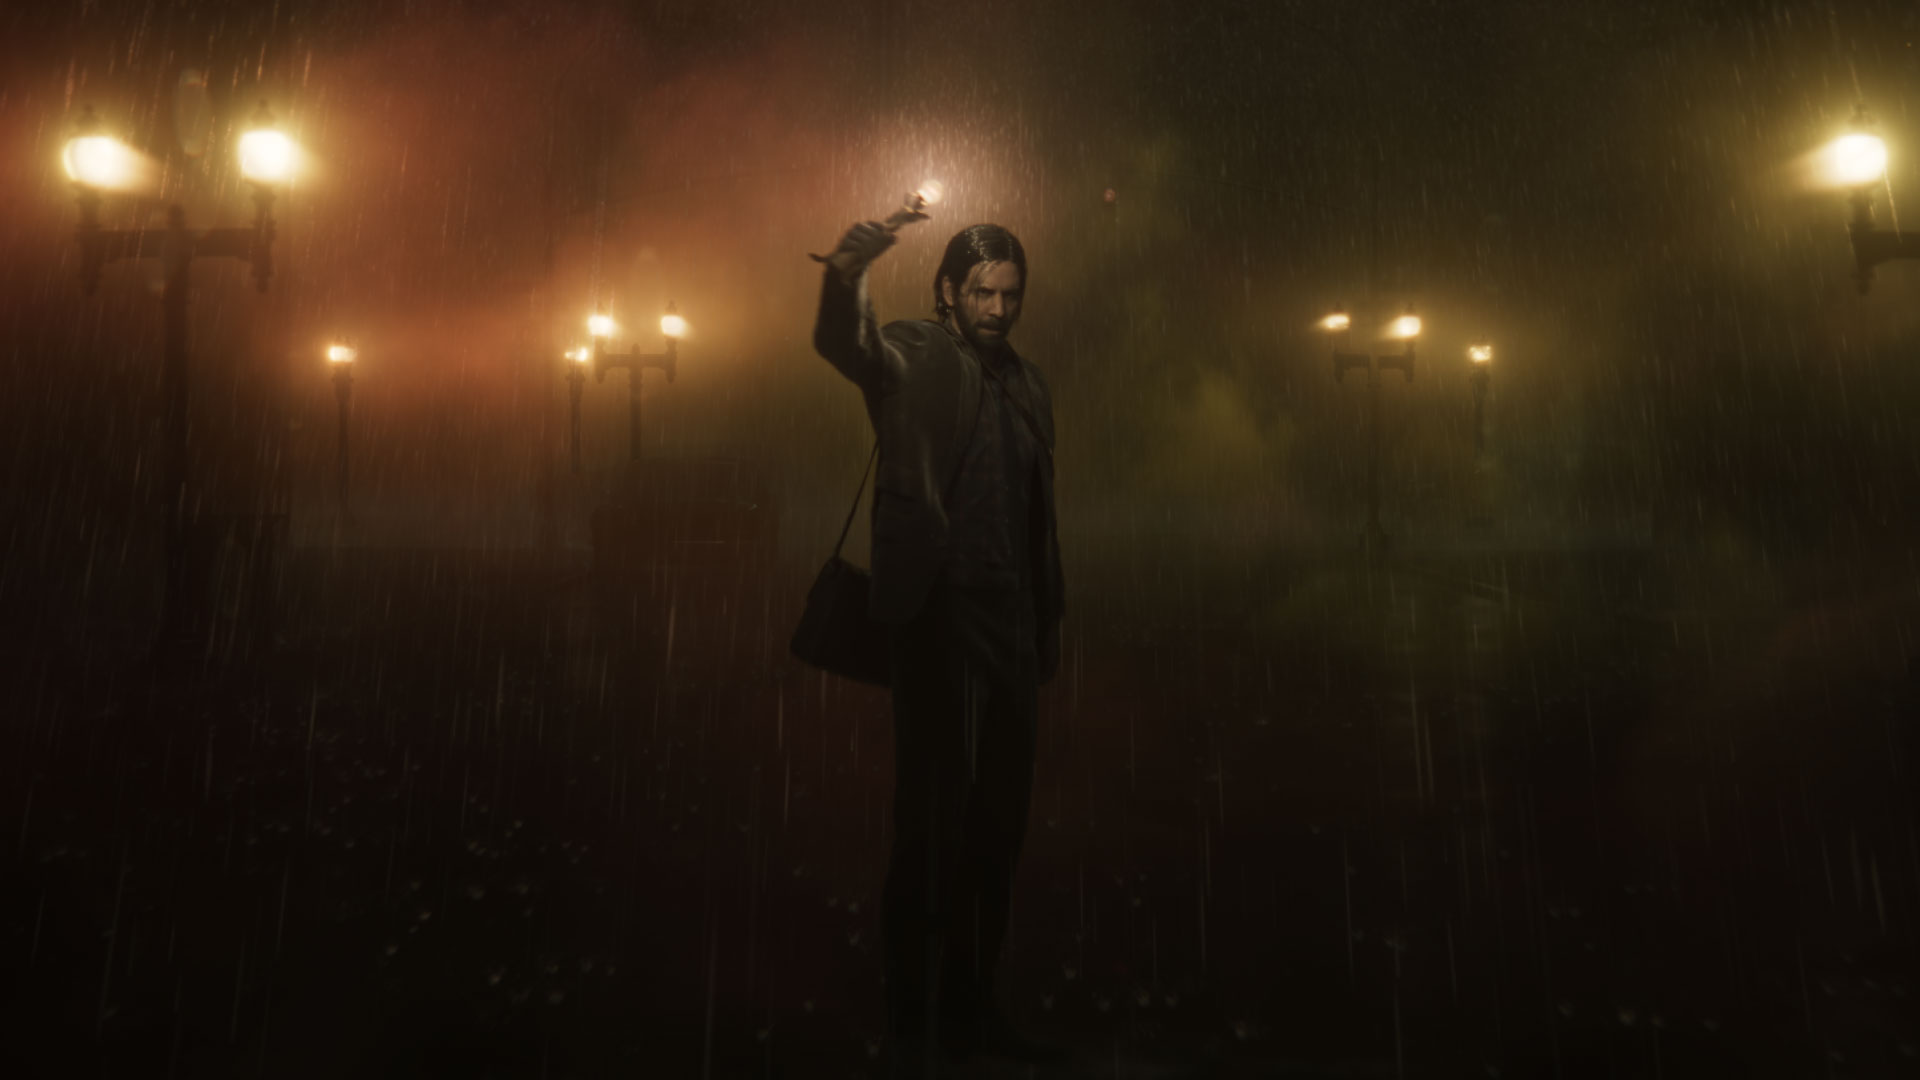 Alan Wake 2' release date, trailer, and latest news